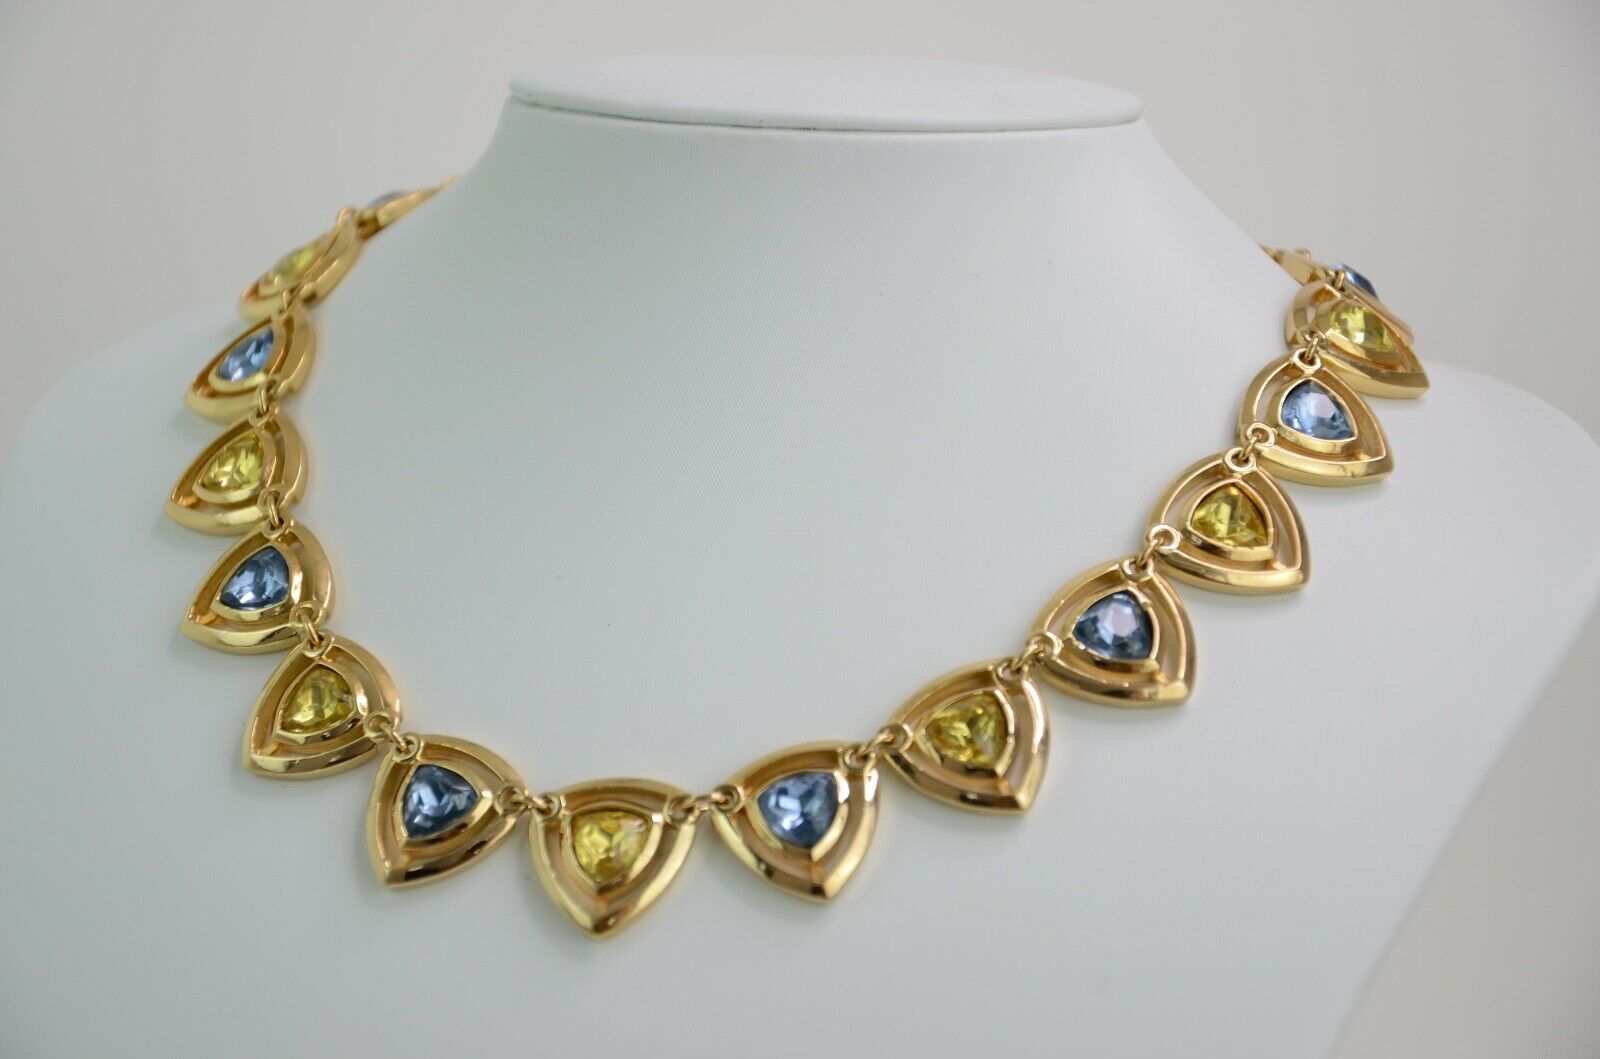 Christian Dior necklace 